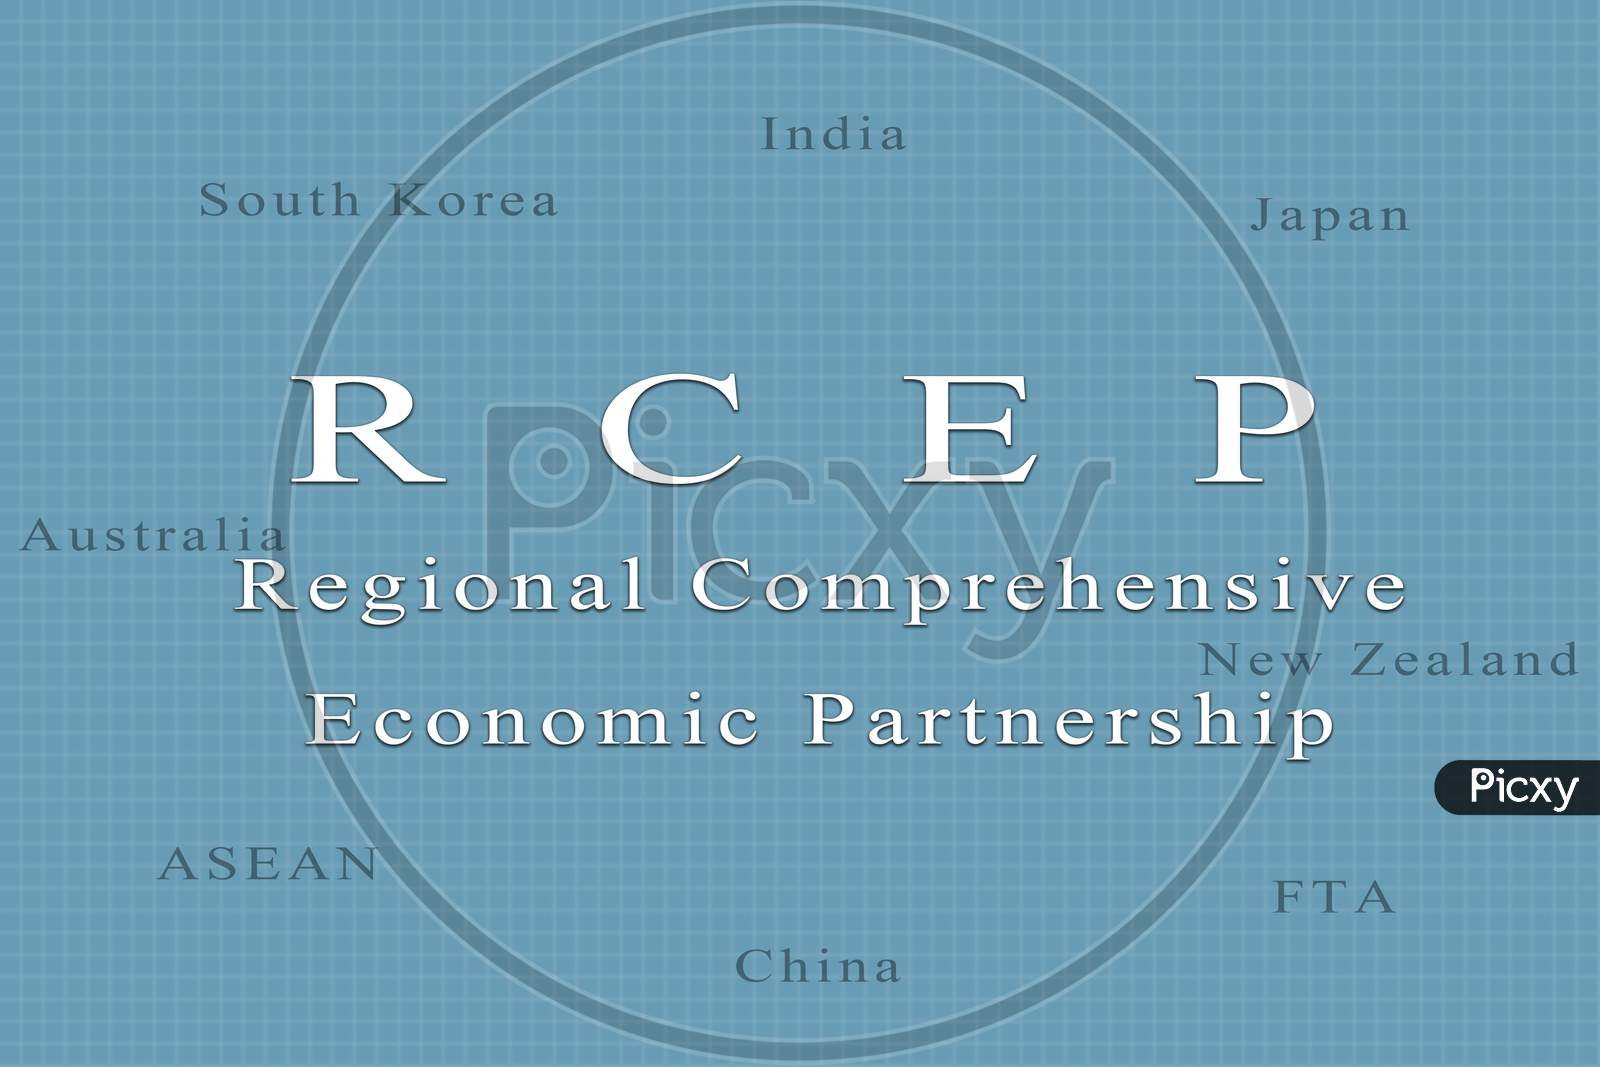 Conceptual Business Trade Illustration With The Words Rcep Or Regional Comprehensive Economic Partnership.